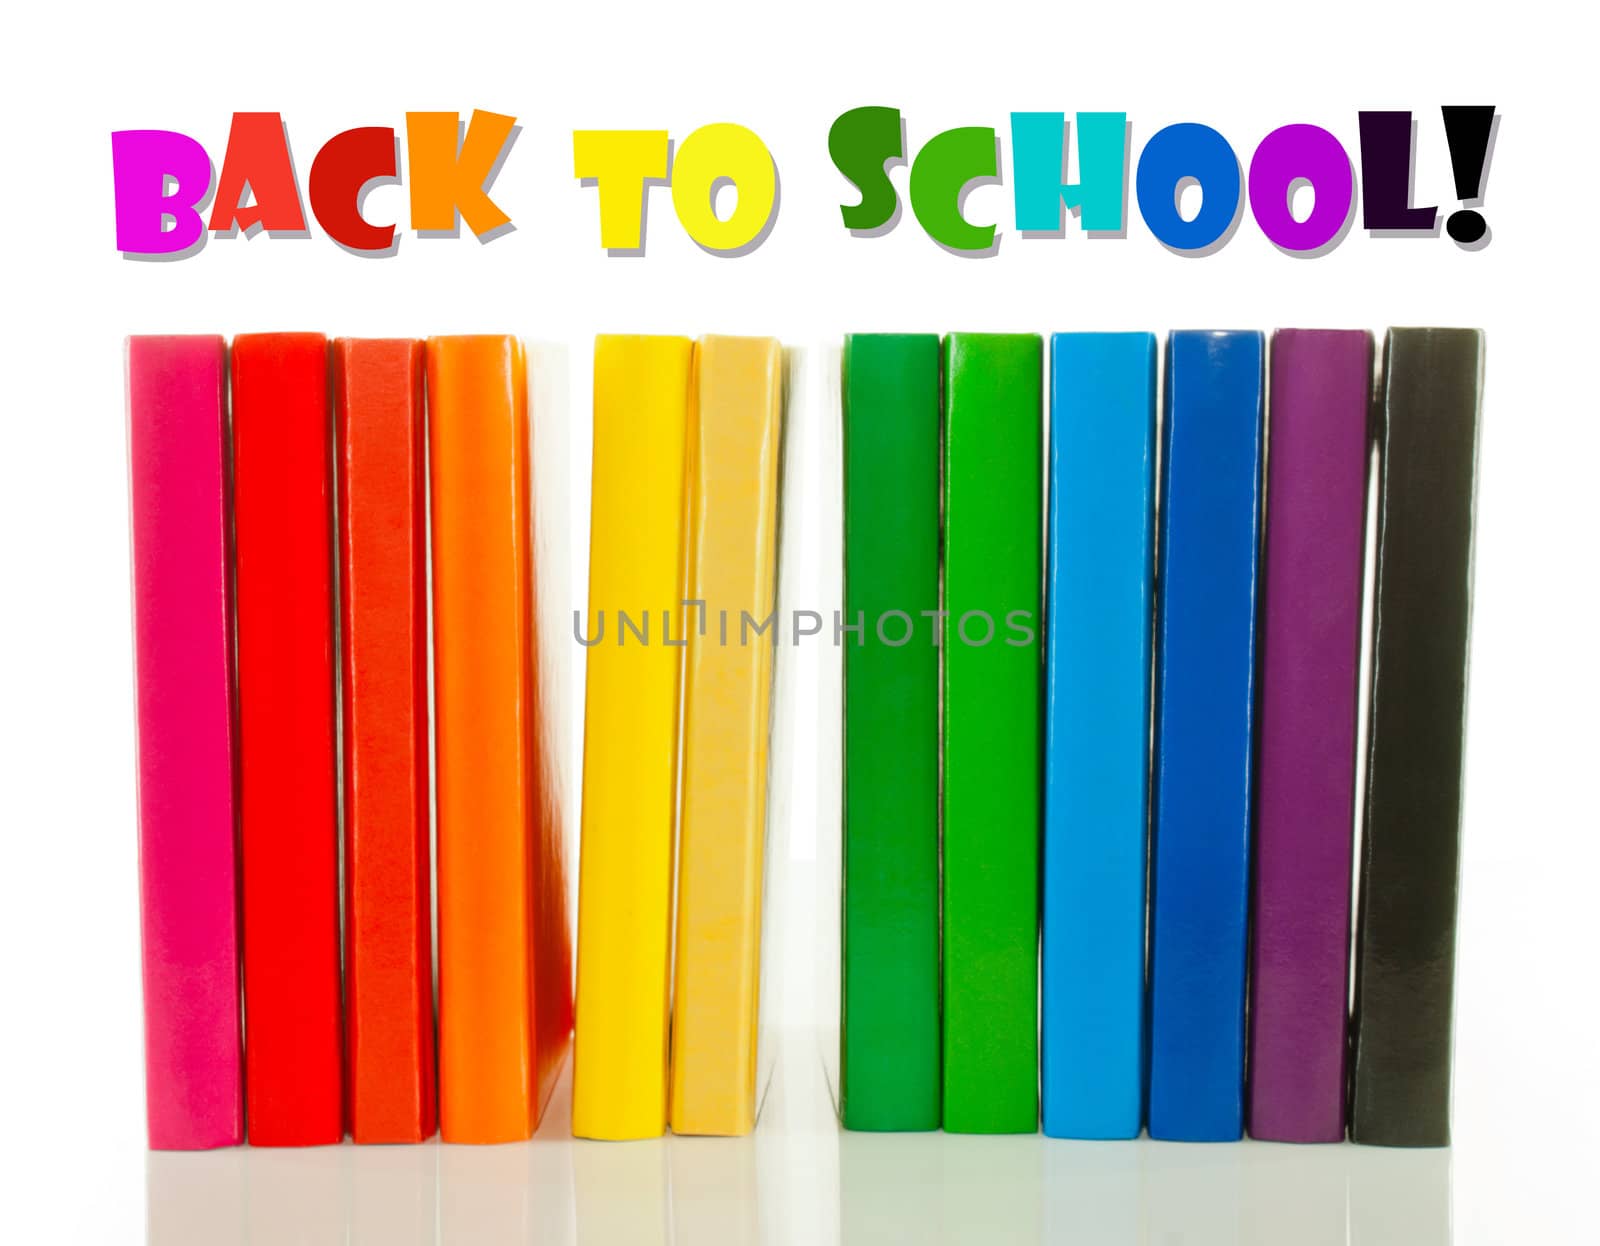 Row of colorful books over white background